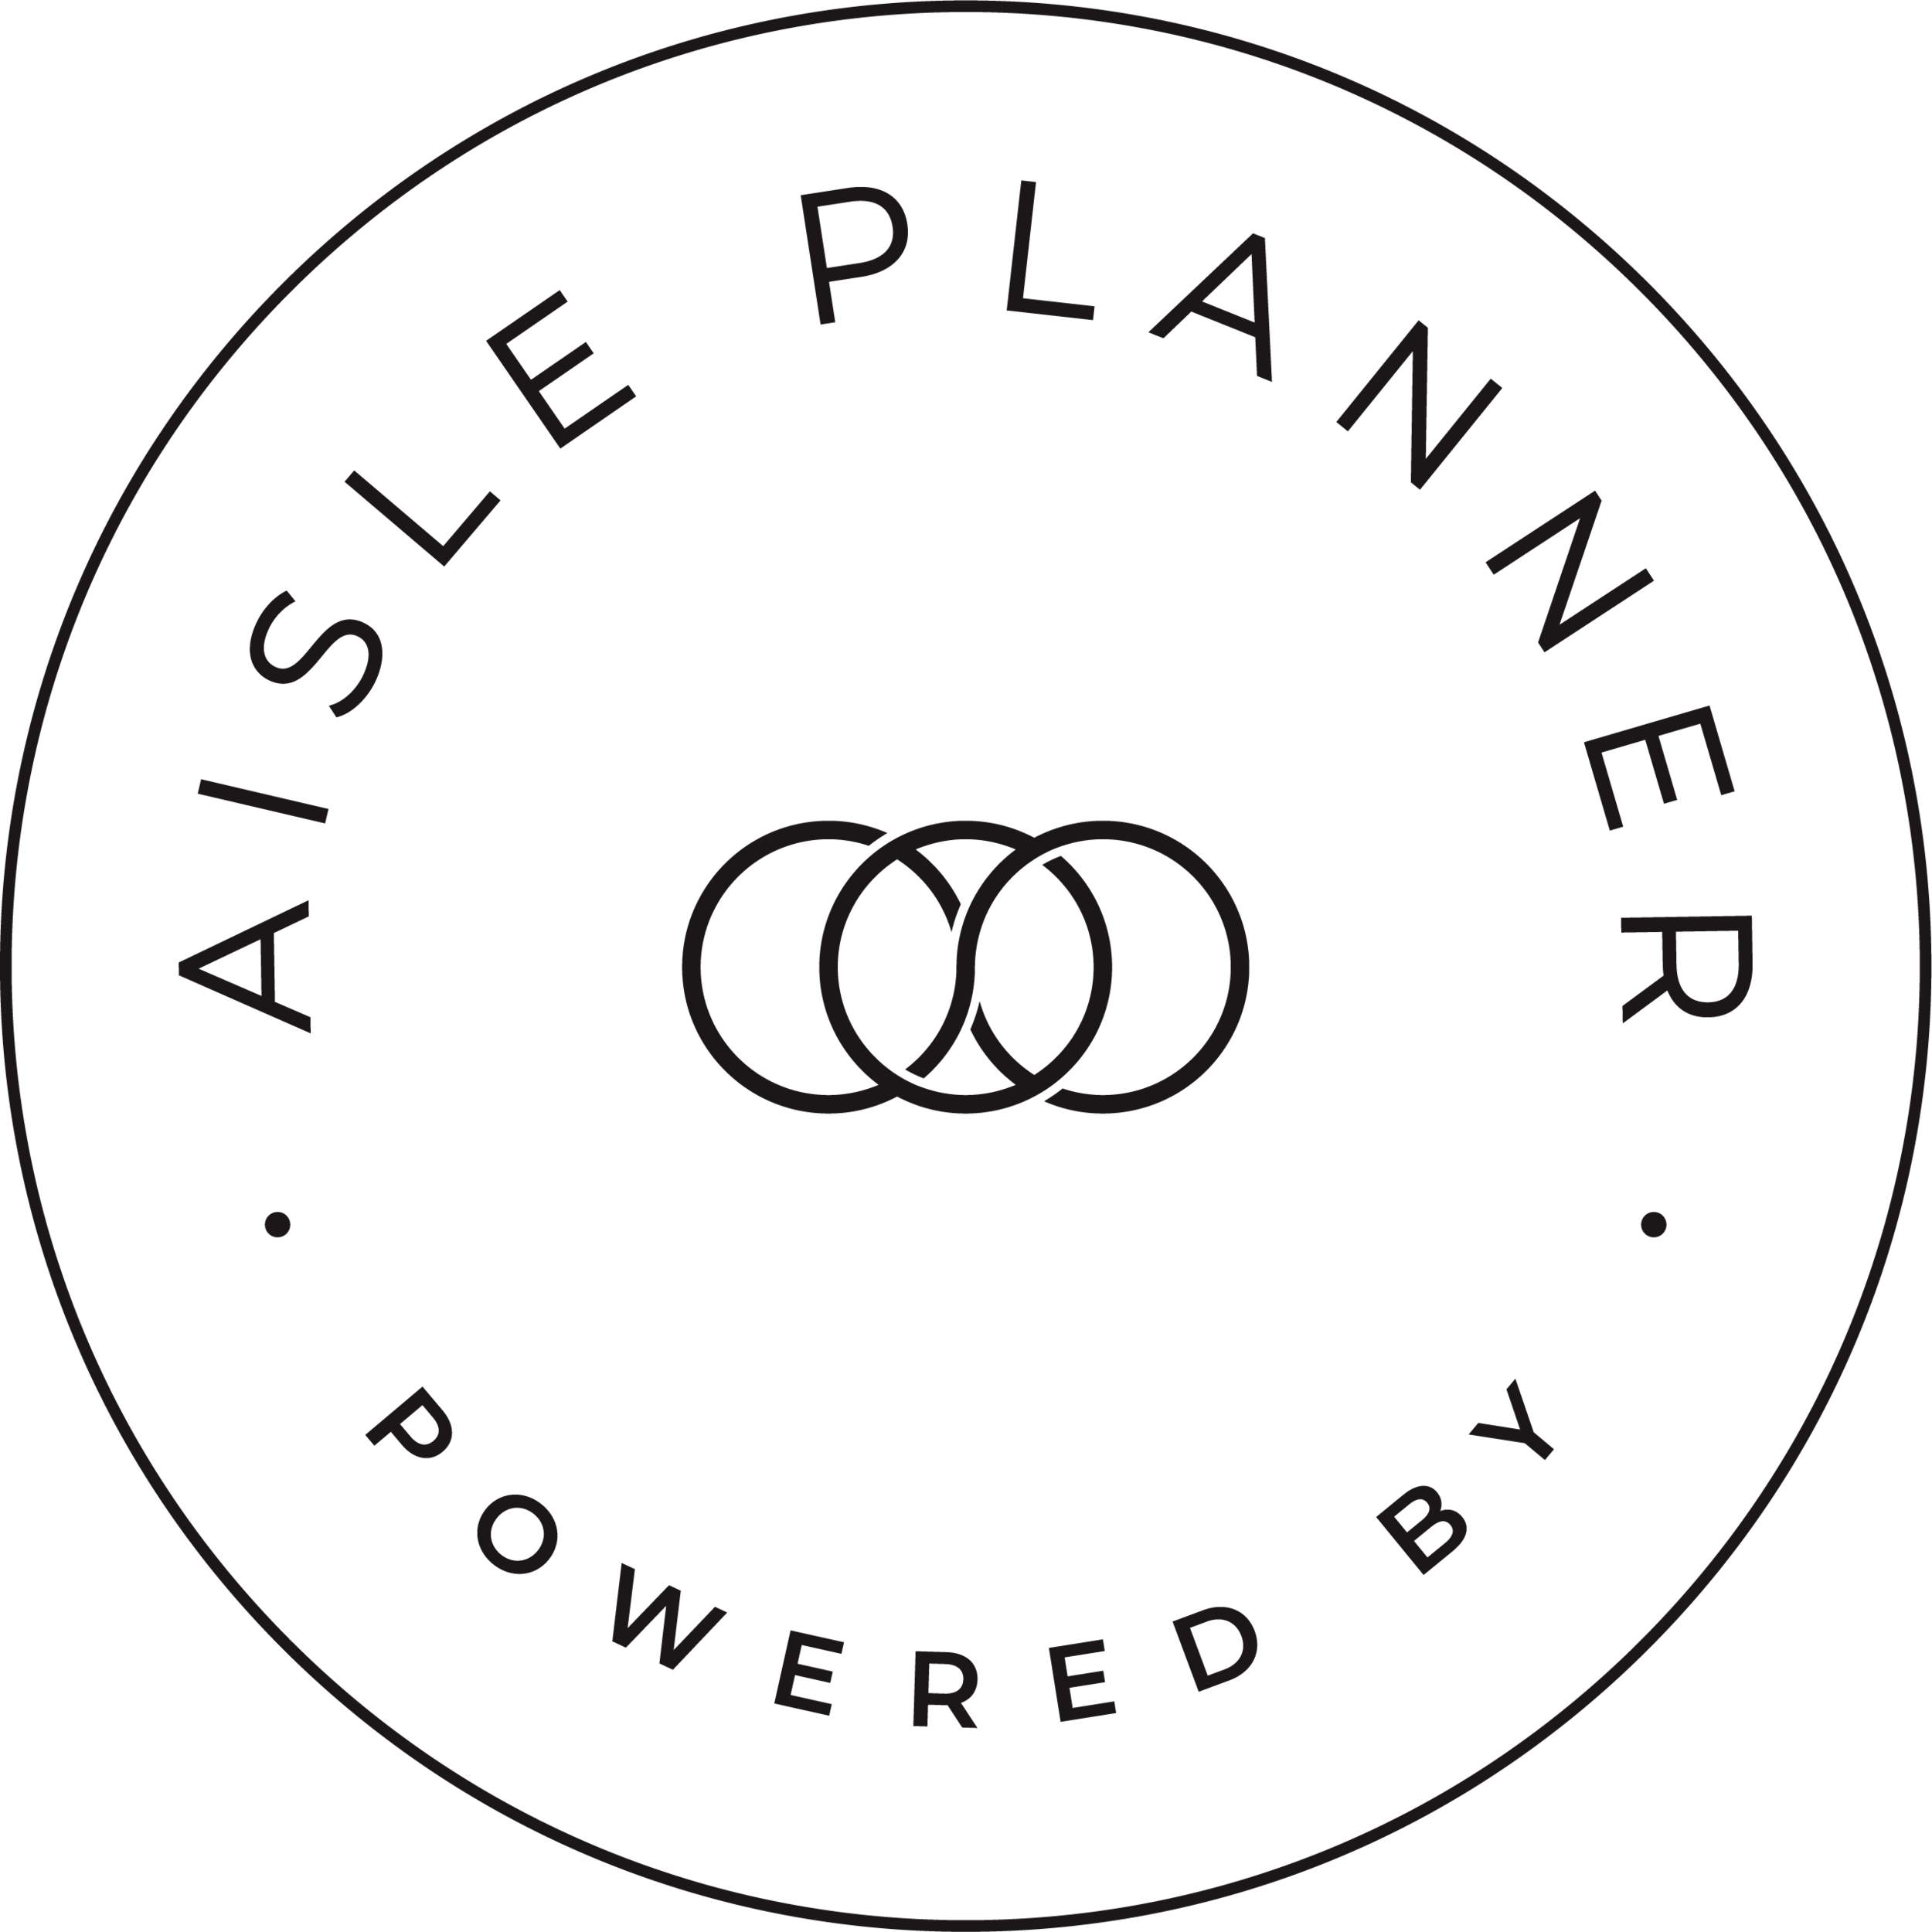 AislePlanner-PoweredBy-OutlinedBadge-Black.png